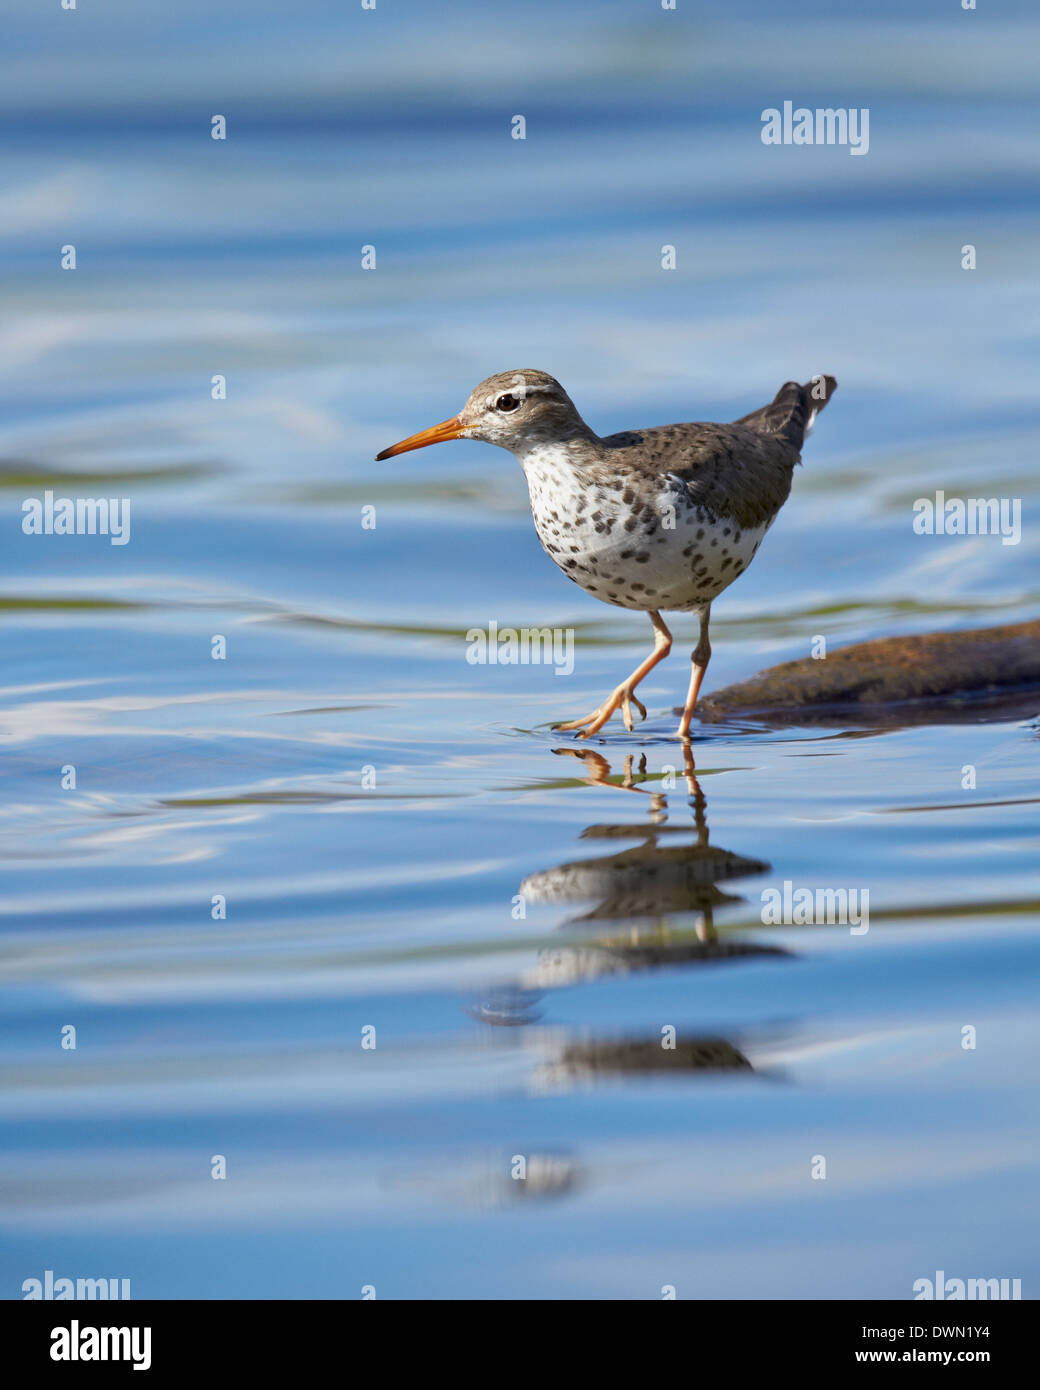 Spotted Sandpiper (Actitis macularia), Yellowstone National Park, Wyoming, United States of America, North America Stock Photo